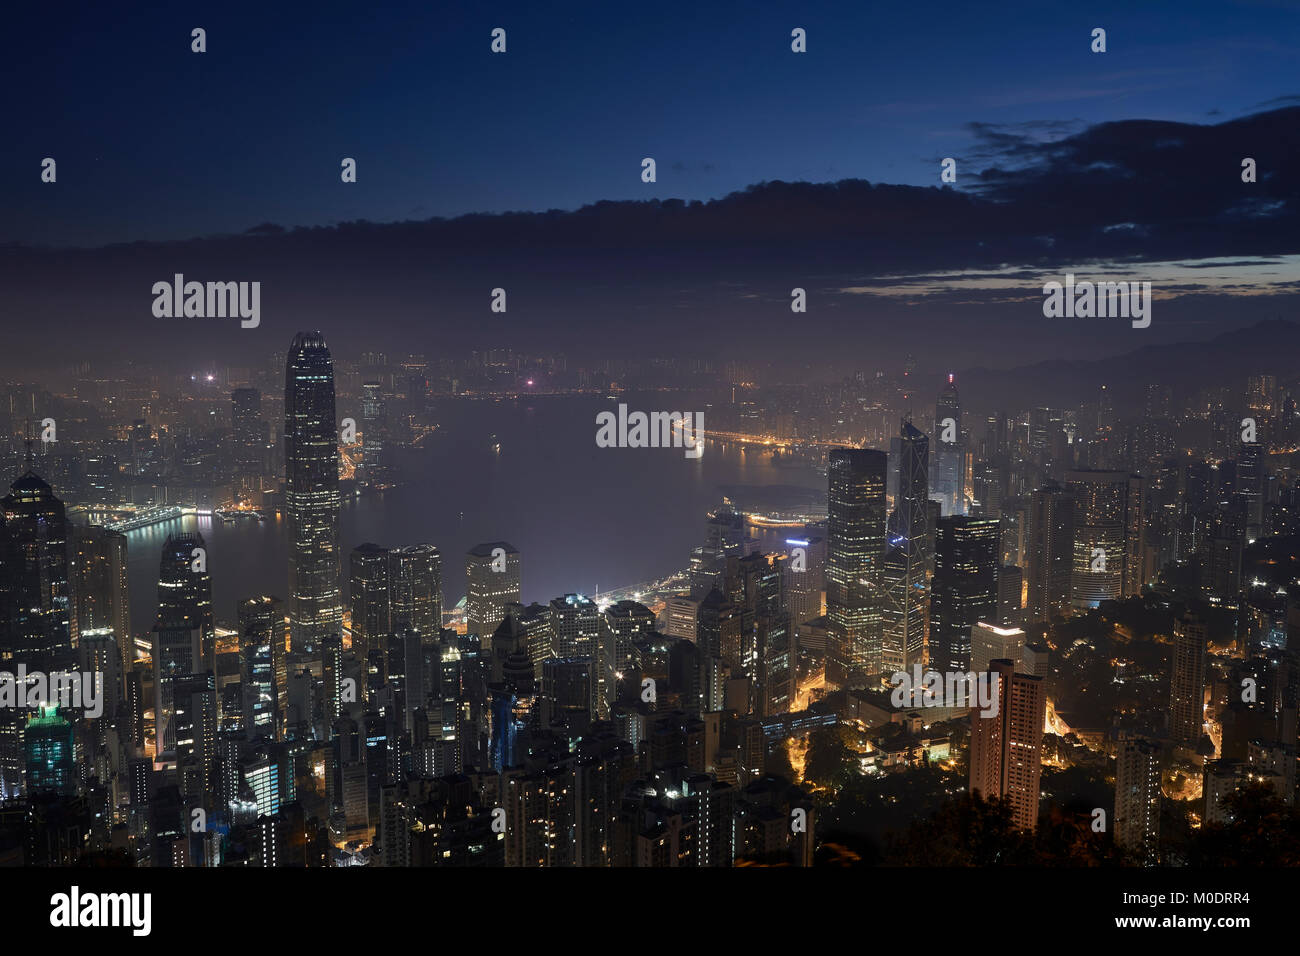 Nightime View Of The Hong Kong Cityscape Viewed From The Peak. Stock Photo